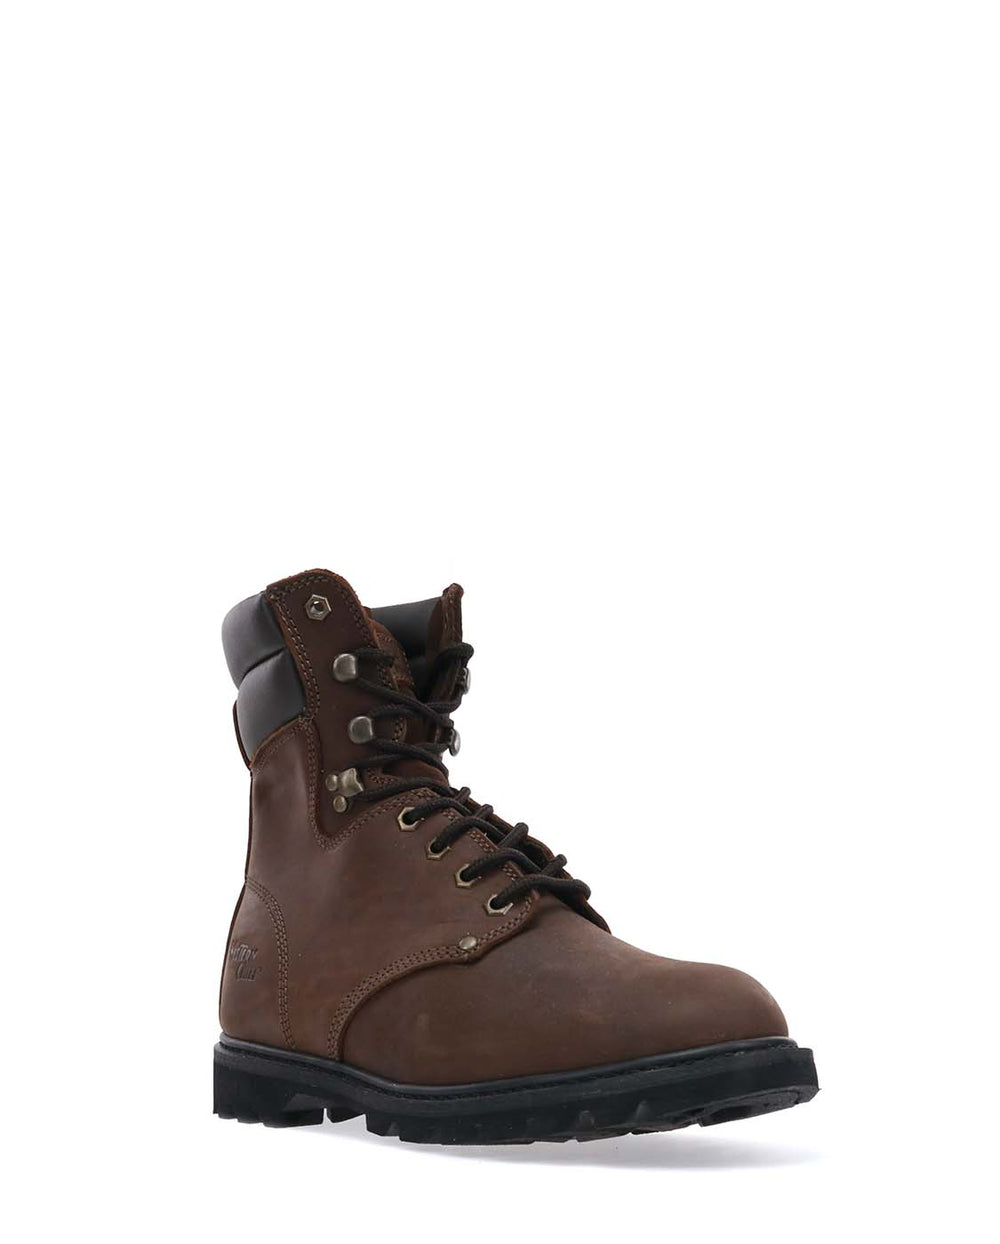 Men's Expedition Work Boot - Brown - Western Chief